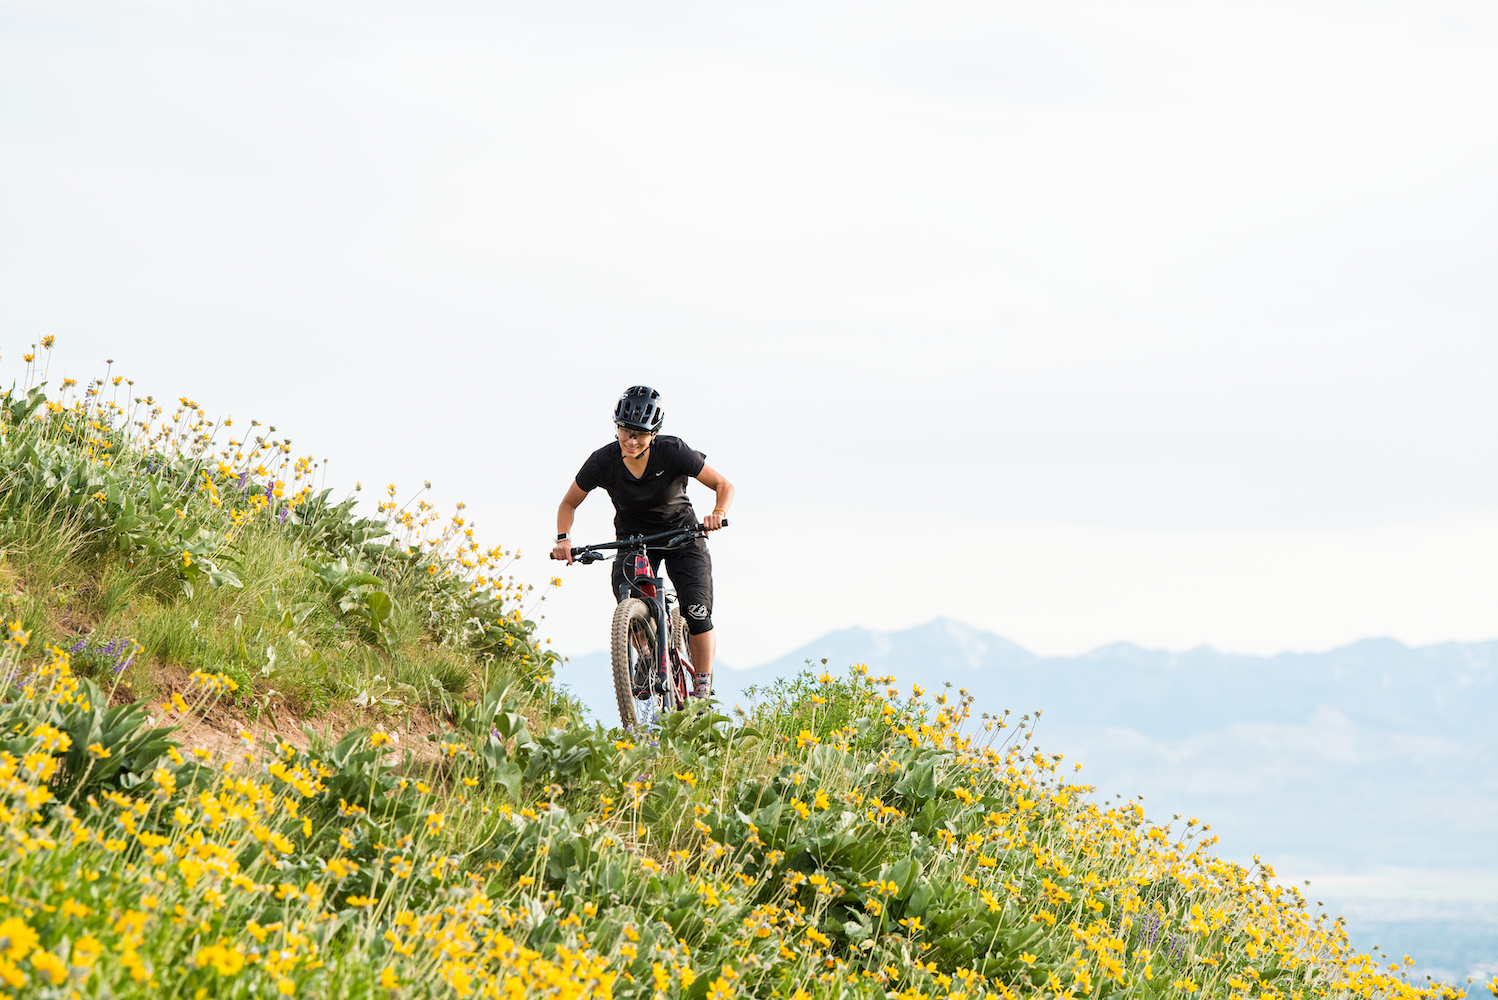 Rider cresting a corner of Utah's Bonneville Shoreline Trail through field of yellow flowers and mountain ridgeline in distance